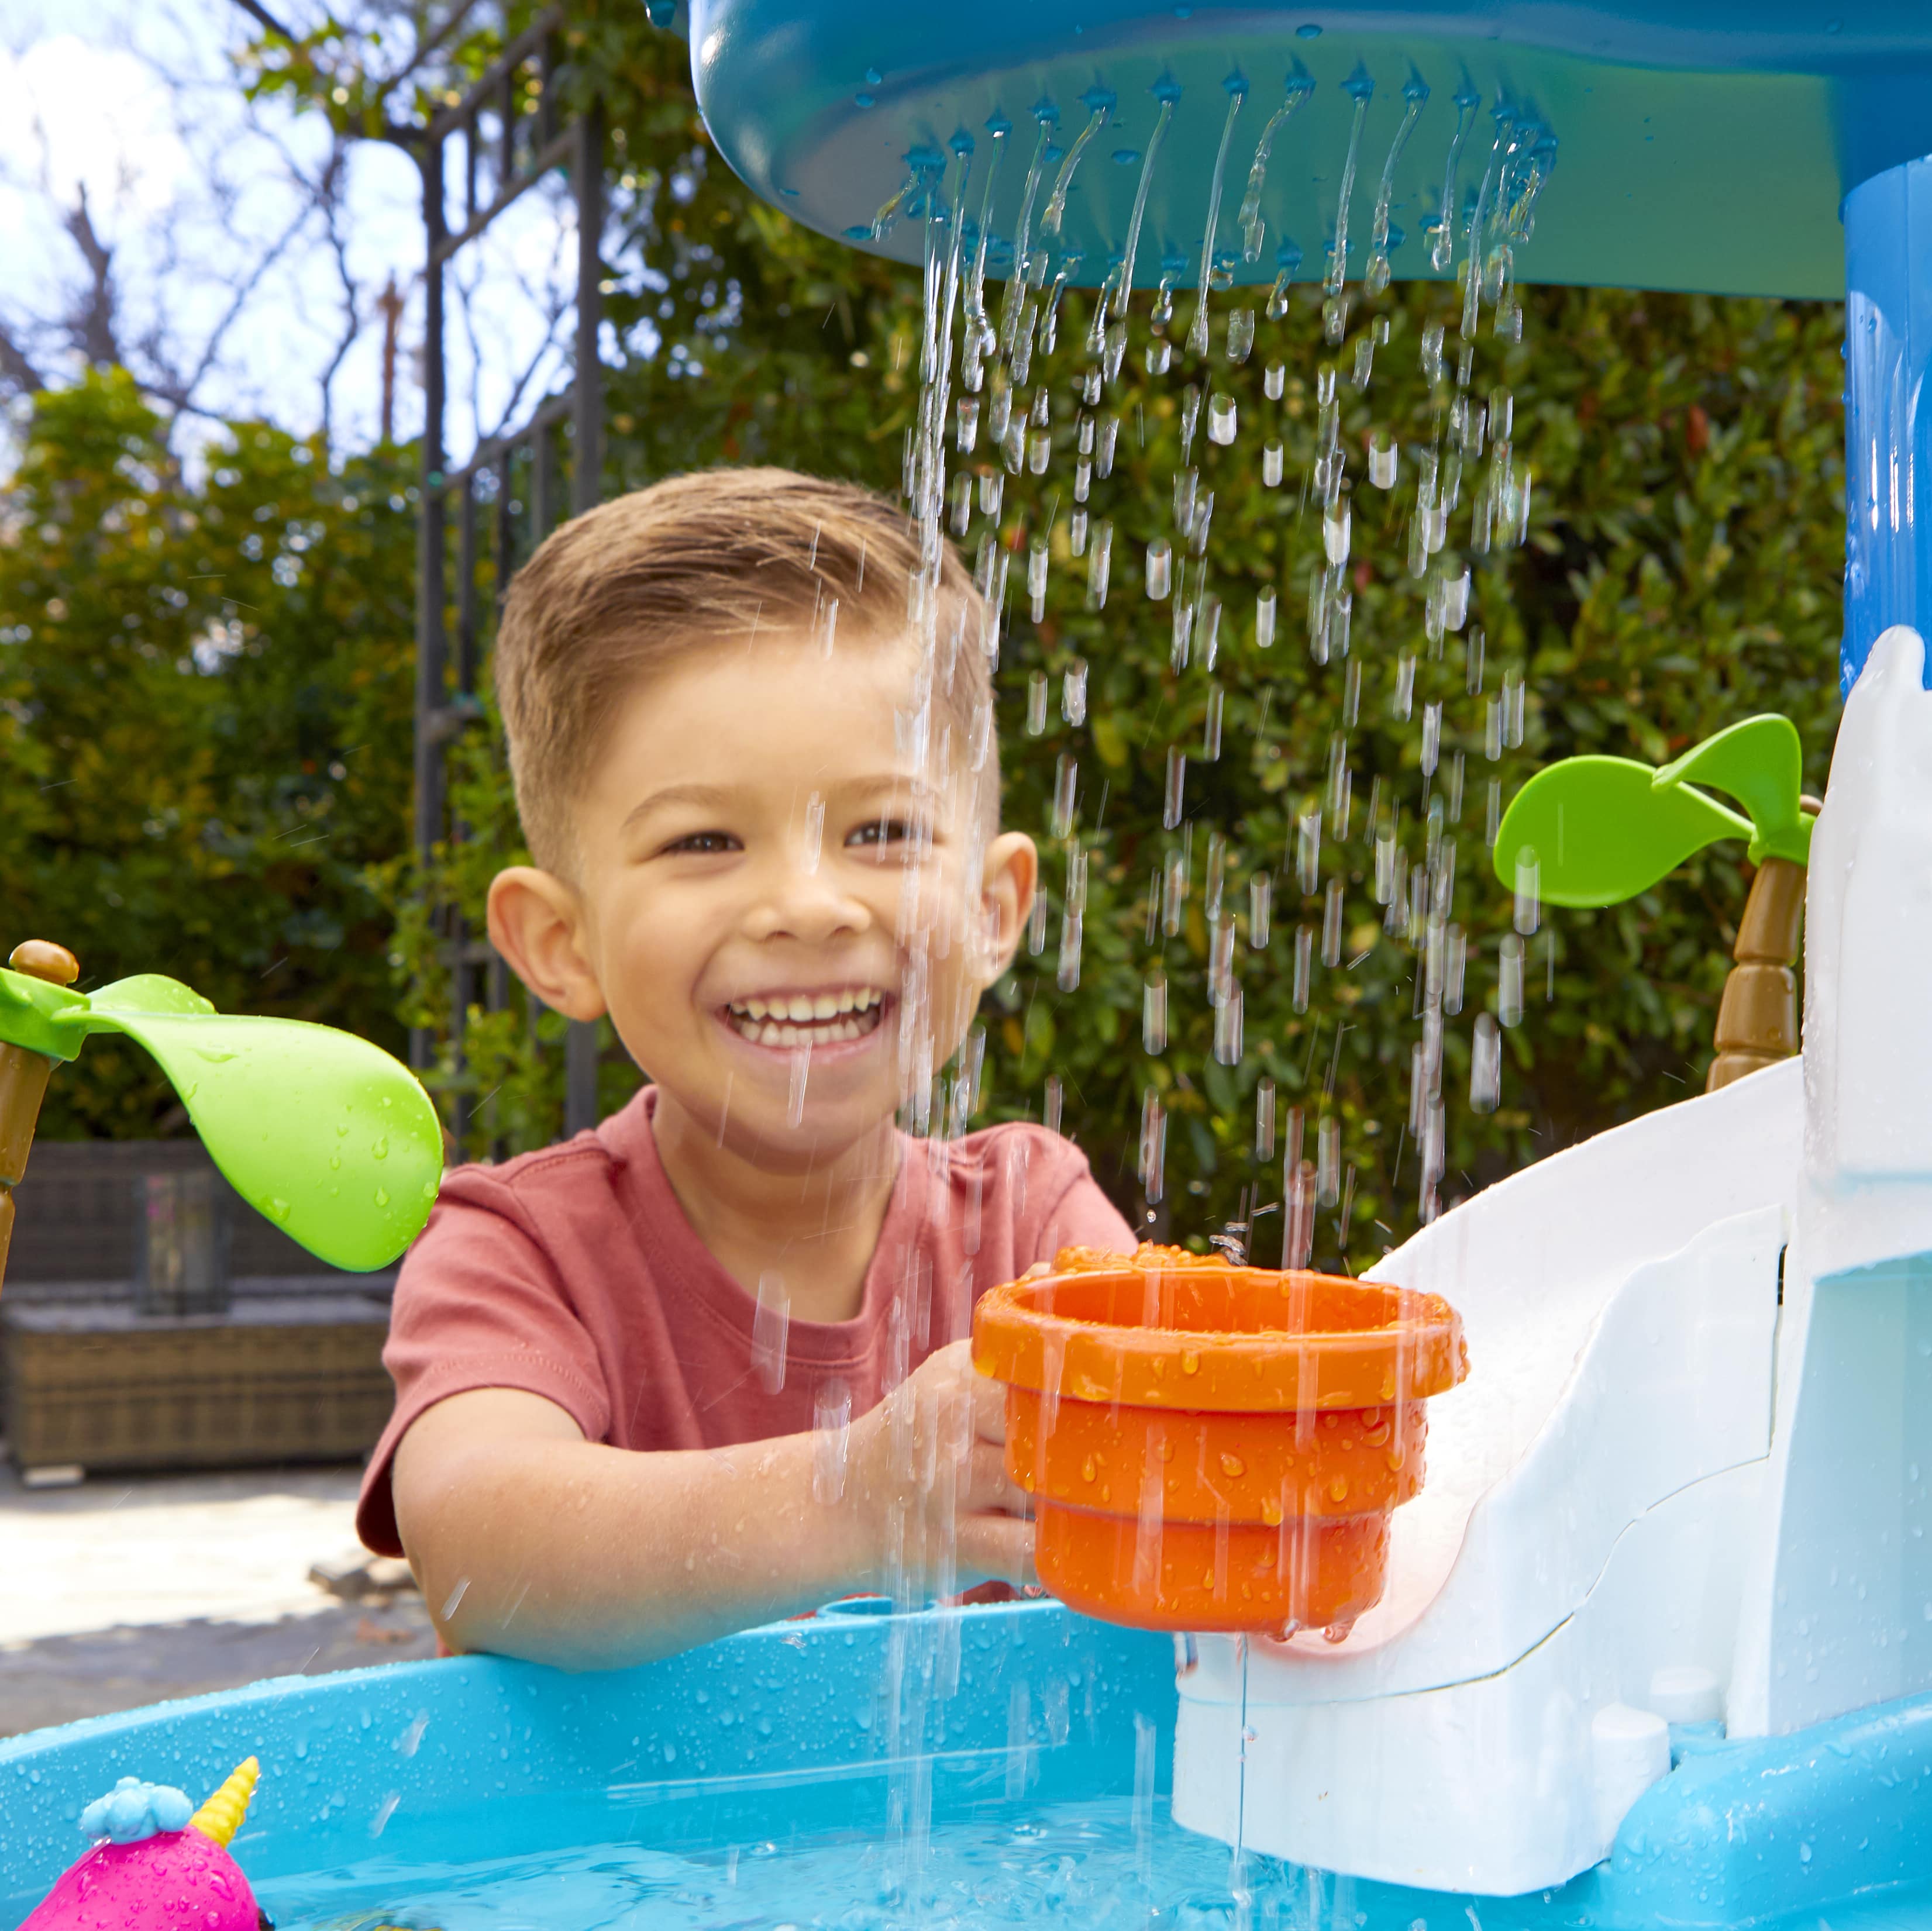 Little Tikes® Waterfall Island™ Water Activity Table with Accessories, for Kids ages 2-5 years - image 5 of 8